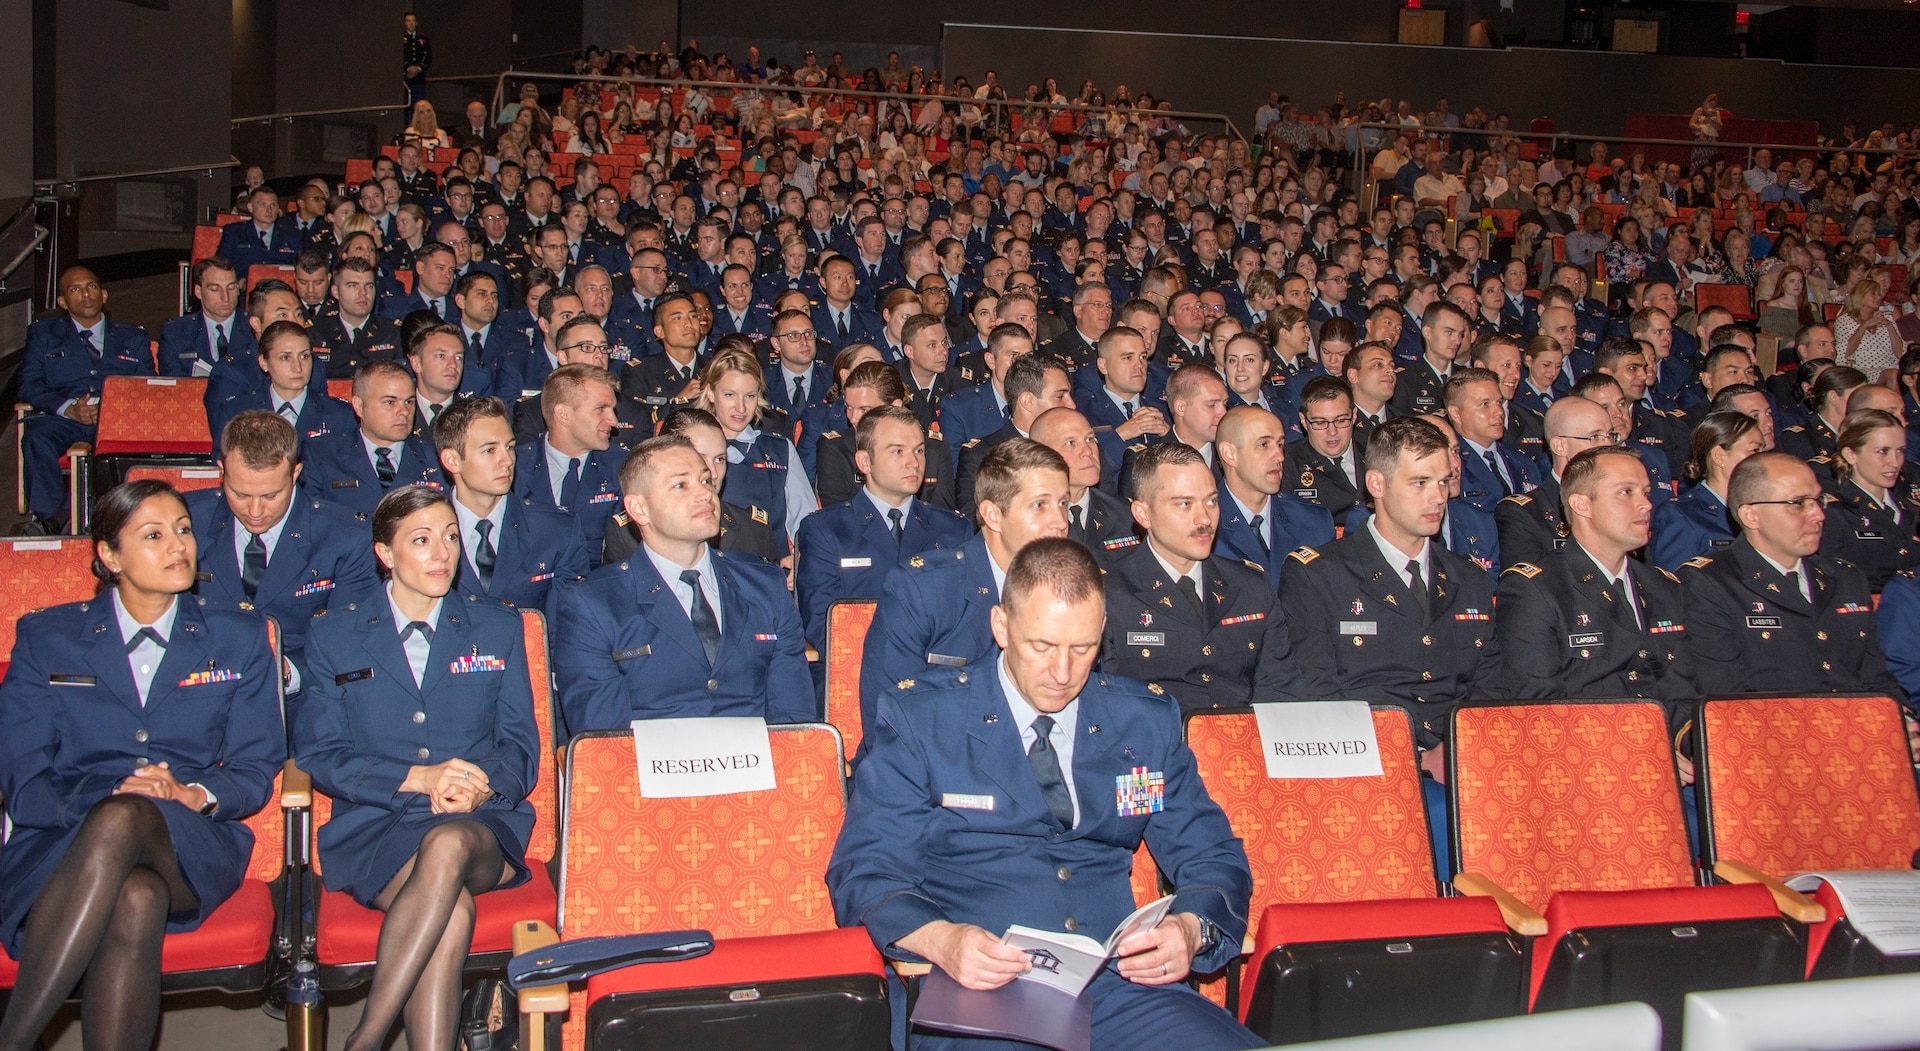 The 2019 San Antonio Uniformed Services Health Education Consortium graduates wait for the ceremony to begin at the Lila Cockrell Theatre in downtown San Antonio June 7. The ceremony honored 228 Army, Air Force, Navy, Public Health and civilian medical education and allied health graduates.